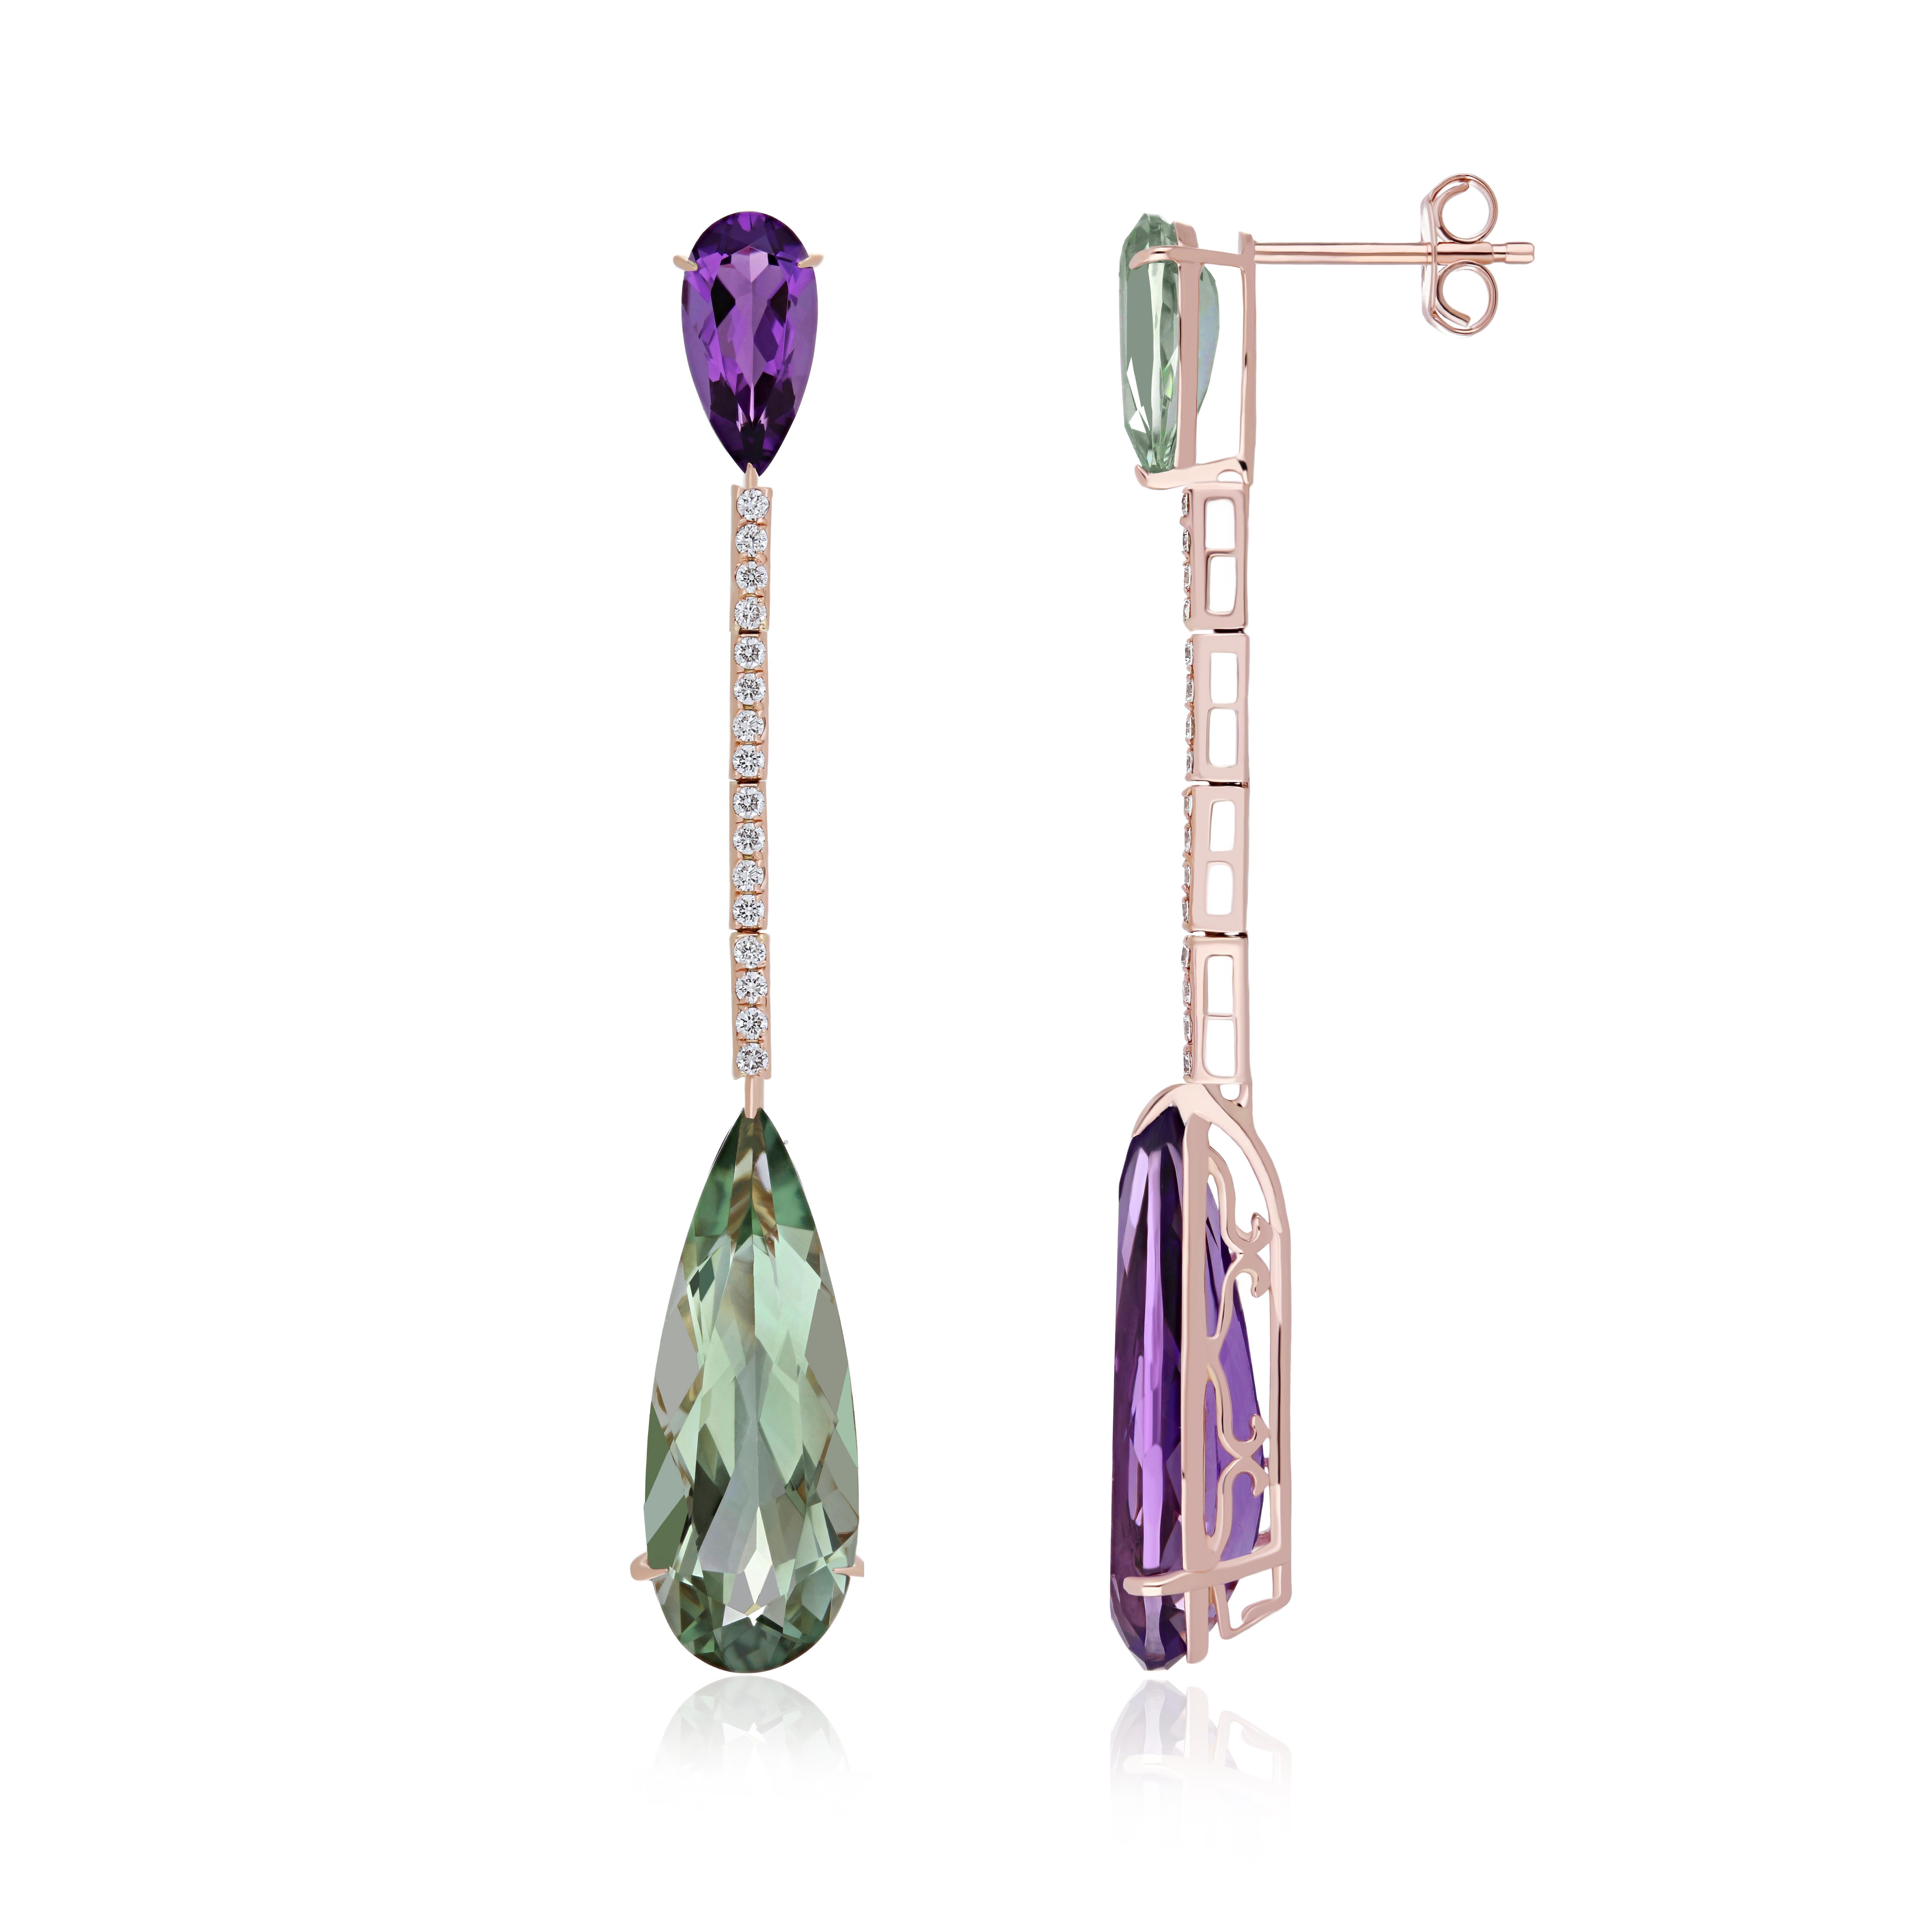 Elegant and Exquisitely Detailed 14Karat Rose Gold uniquely mismatched pair of Earrings adorned with Pear Shape Mint Quartz weighing approx.6.65Cts (total.), in contrast with Pear Shape Amethyst weighing approx. 6.60Cts (total), and micro prove Set